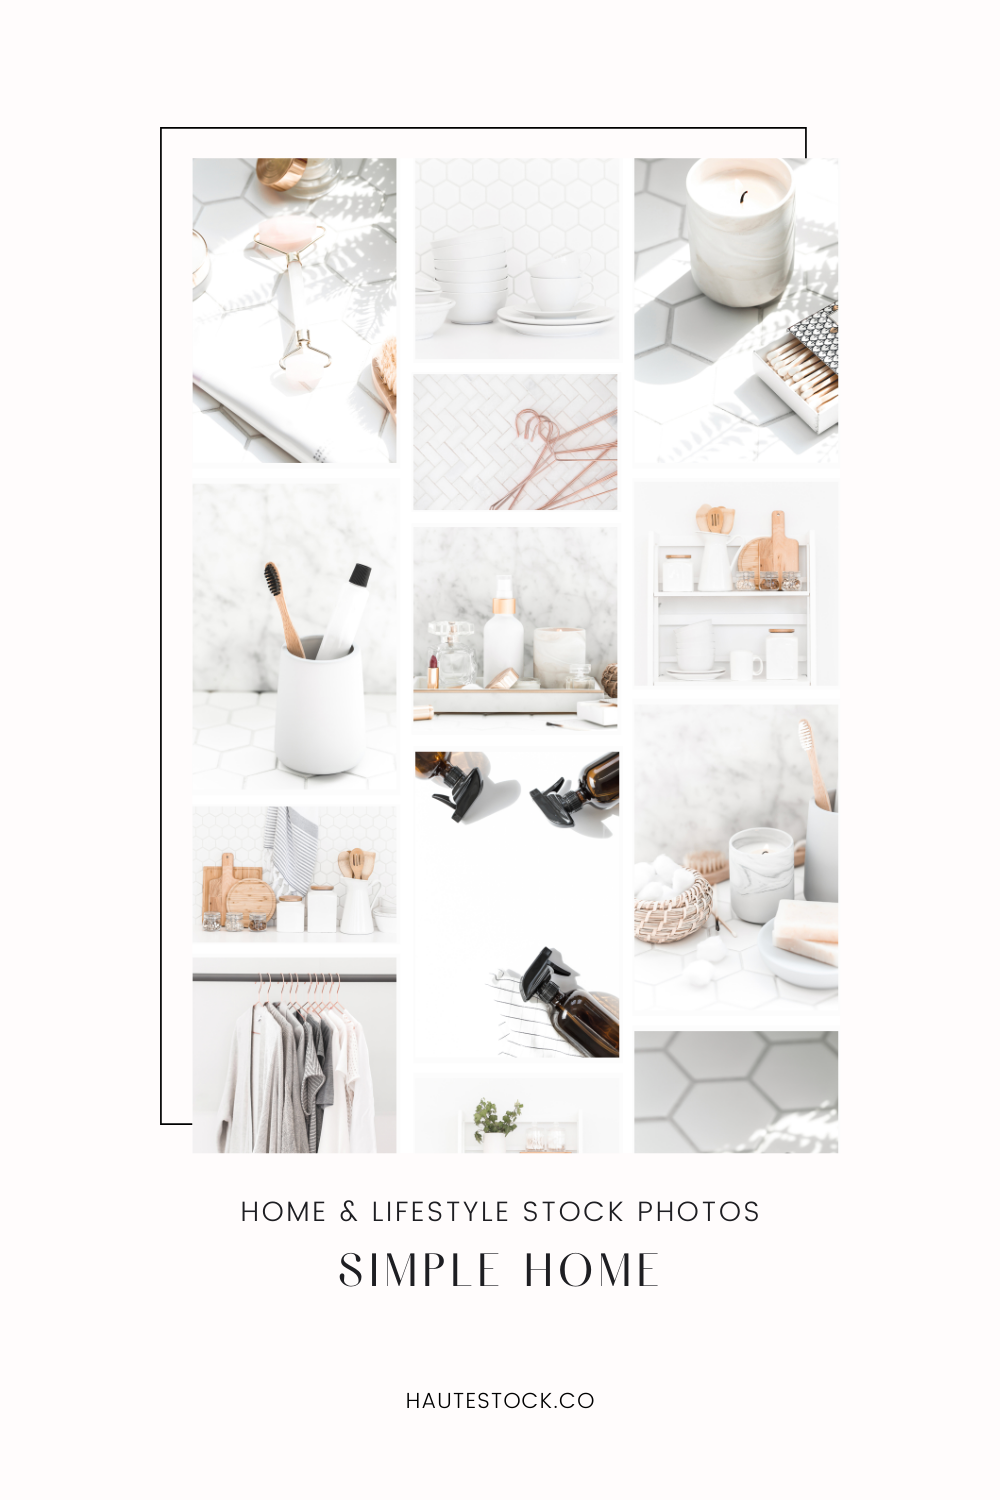 Clean and minimal home styled stock photos